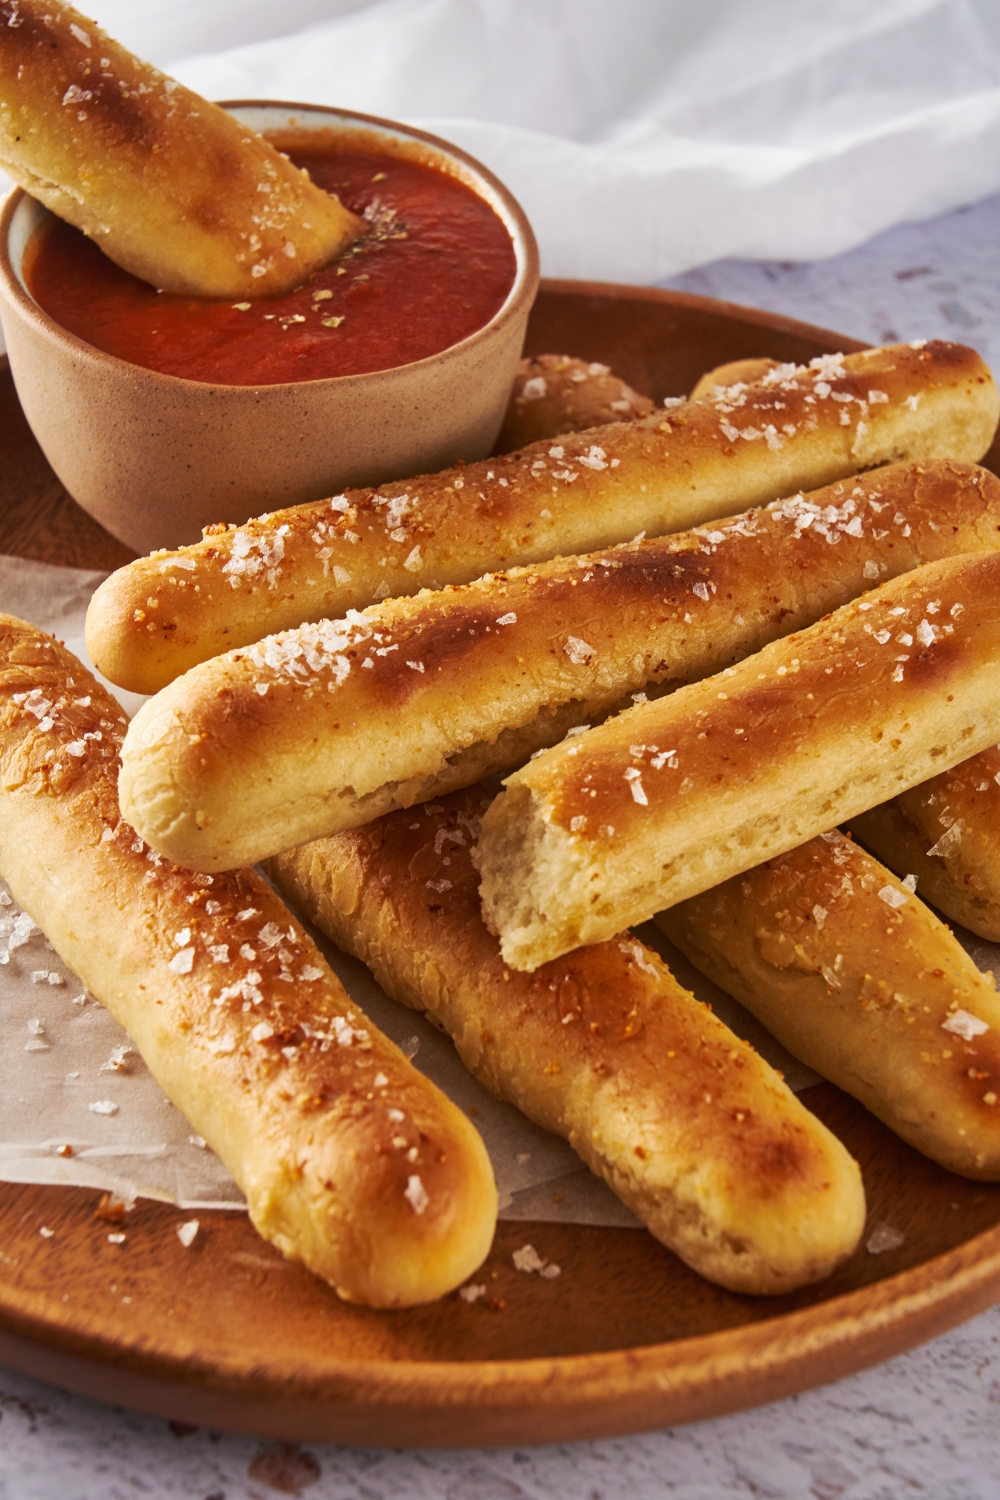 A plate with breadsticks and a small dipping cup of marinara sauce. A breadstick is being dipped into the sauce.